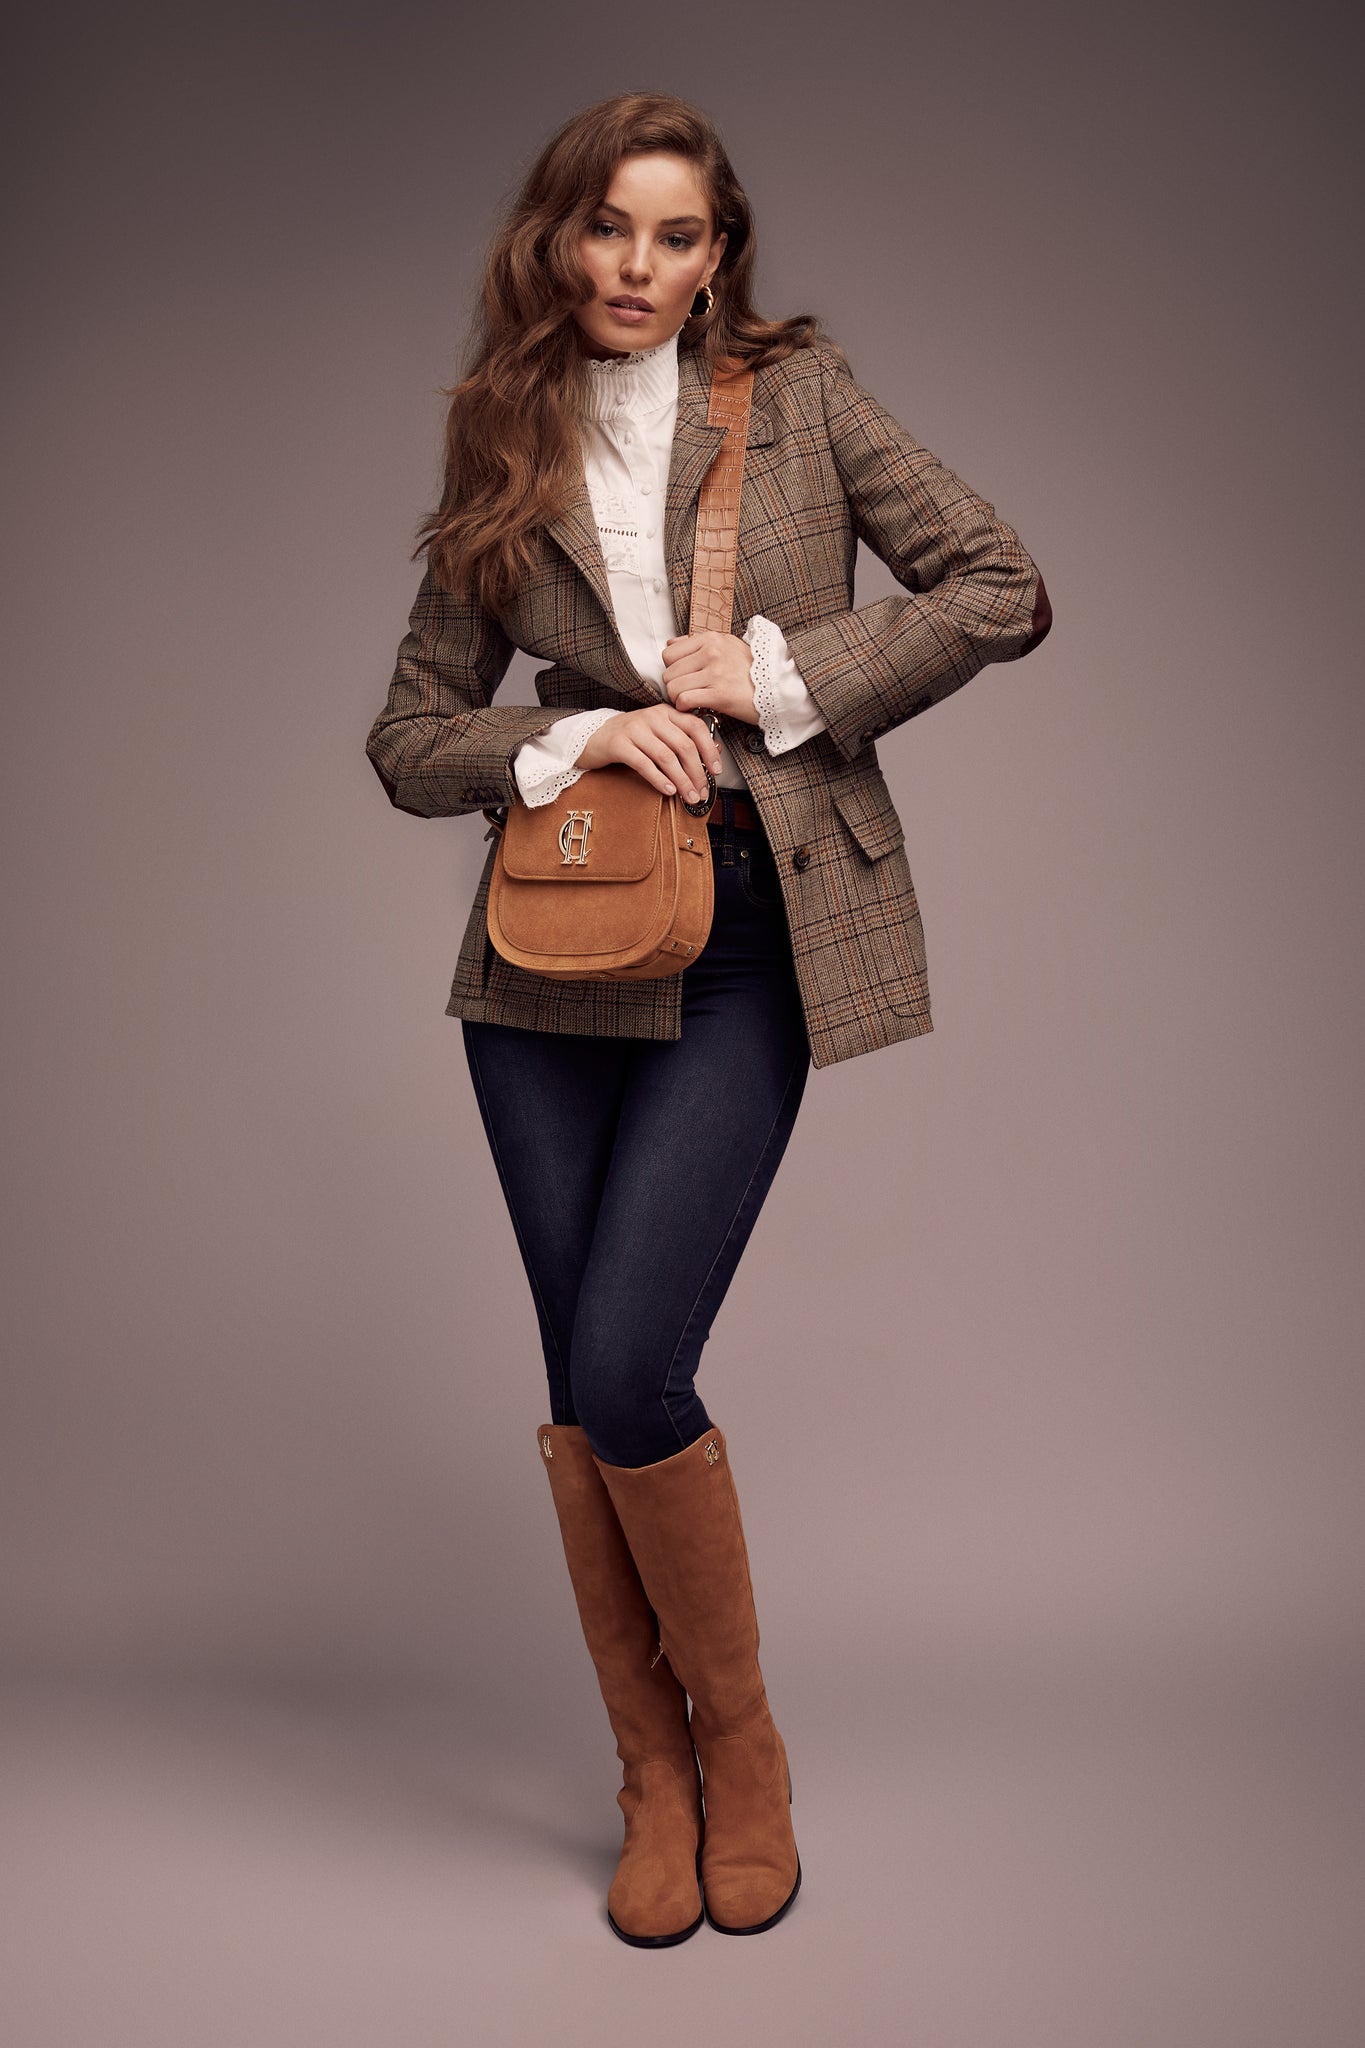 womens classic slim fit single breasted blazer in brown and orange tweed with lower patch pockets with concealed button flap contrast brown suede shoulder gun patch with elbow patches and horn button finish on cuffs and front worn with navy jeans tan knee high boots and white shirt